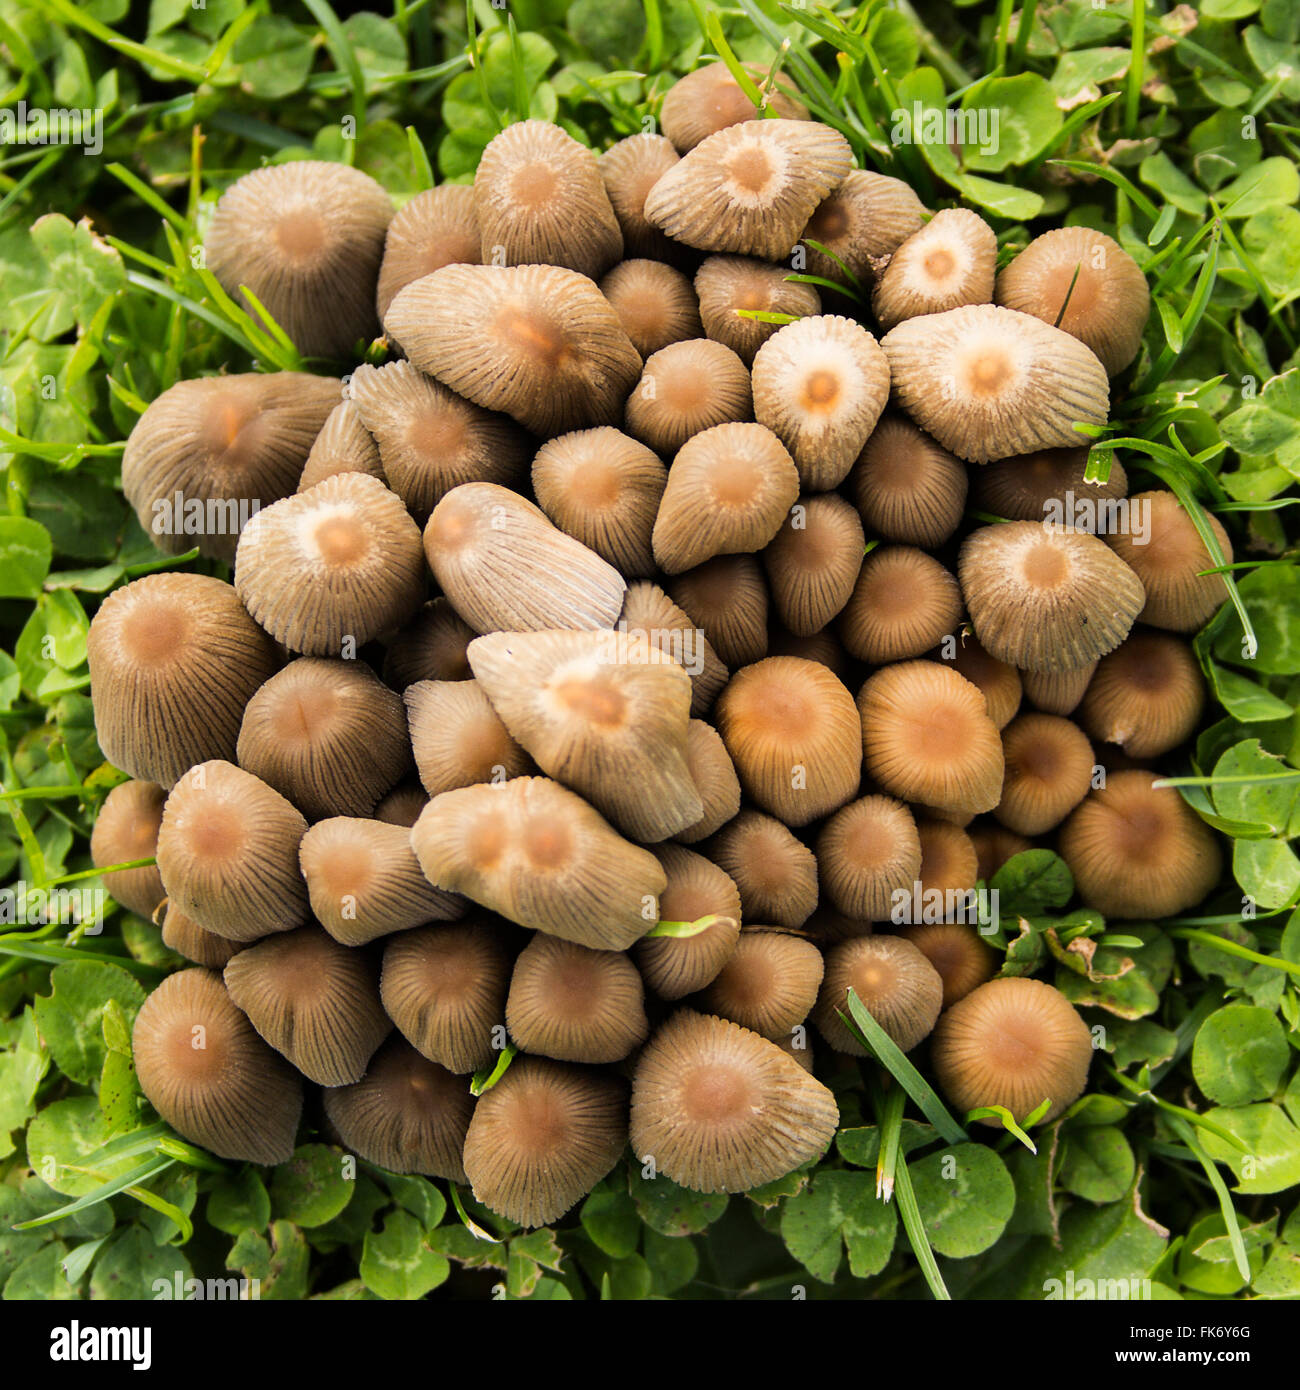 Deep domed brown fungi on grass in striking mass group. Square format framed with green grass and small leaves.  Ariel view looks arty with lmpact . Stock Photo